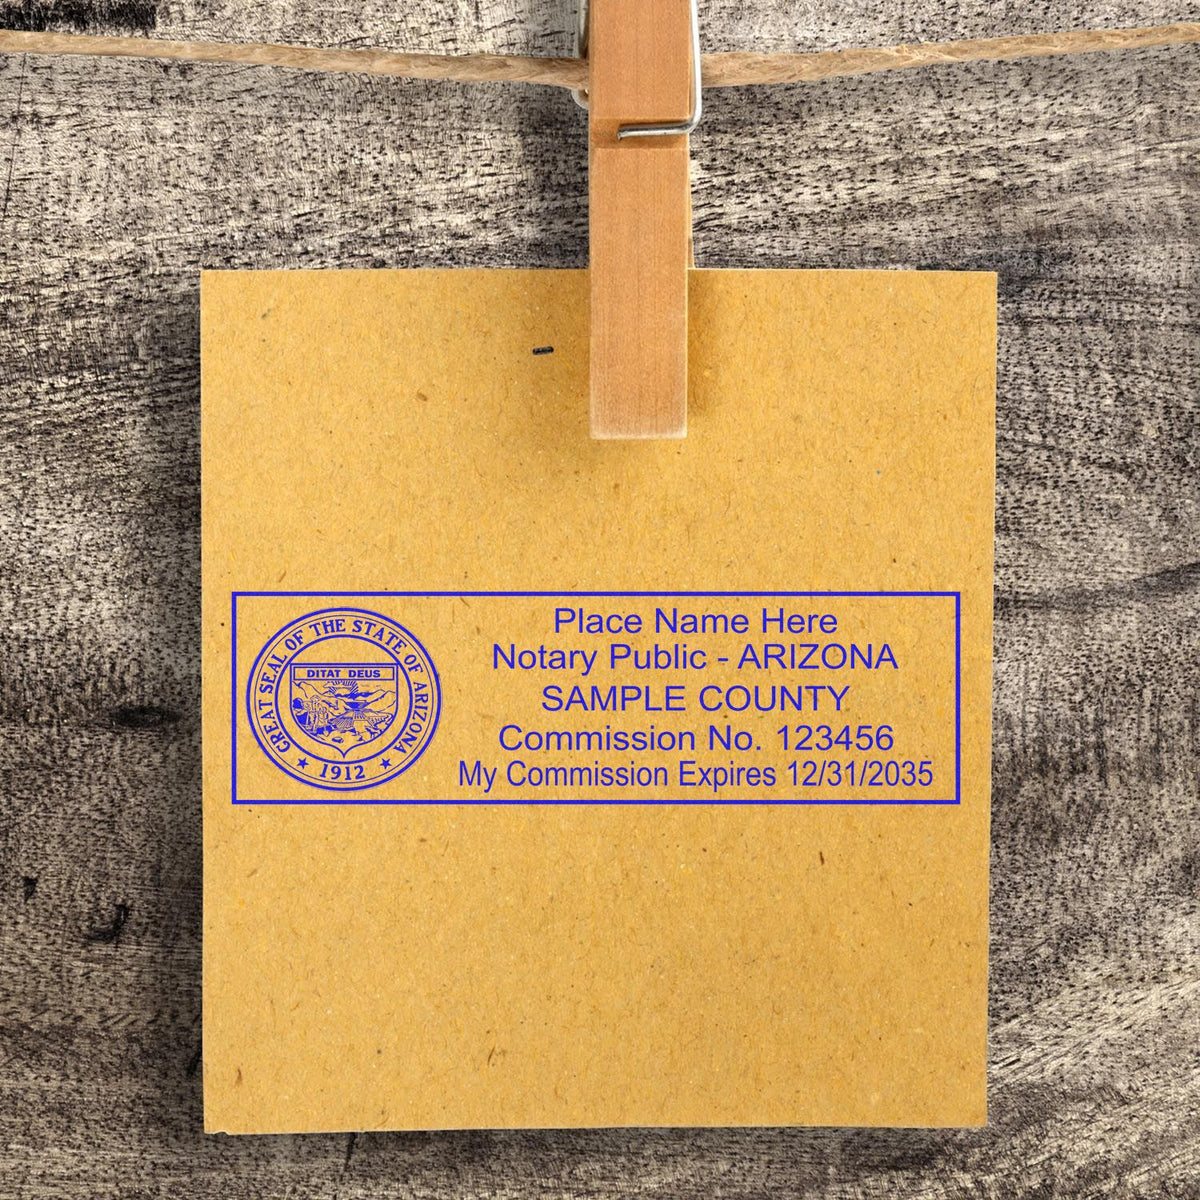 An alternative view of the Heavy-Duty Arizona Rectangular Notary Stamp stamped on a sheet of paper showing the image in use